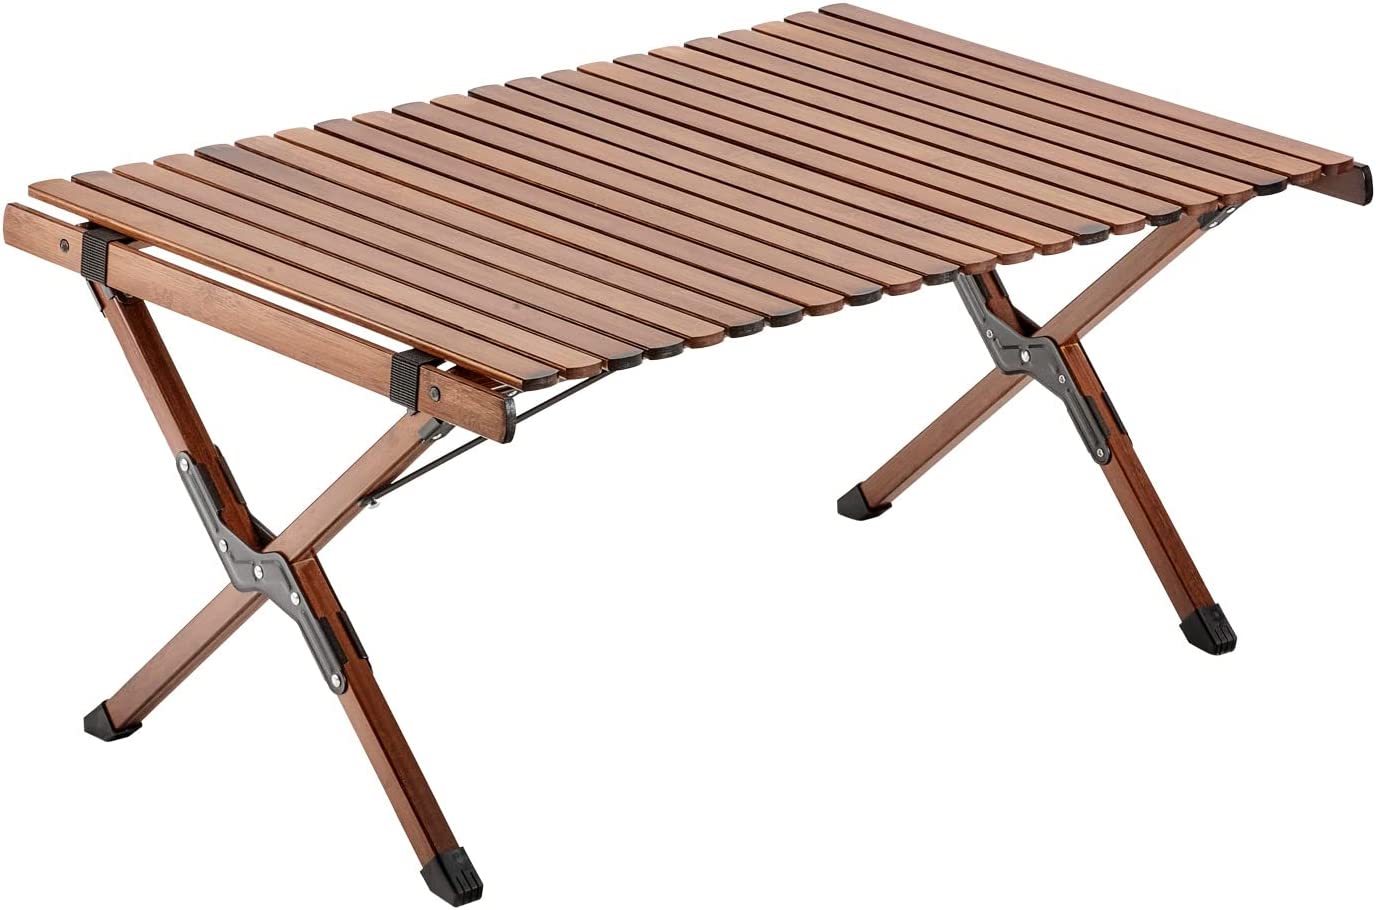 UNICOO –Bamboo Folding Picnic Table, Portable Camping Table W/Carry Bag, Low Height Foldable BBQ Roll Up Table, Beach Table for Indoor & Outdoor Party, BBQ and Hiking